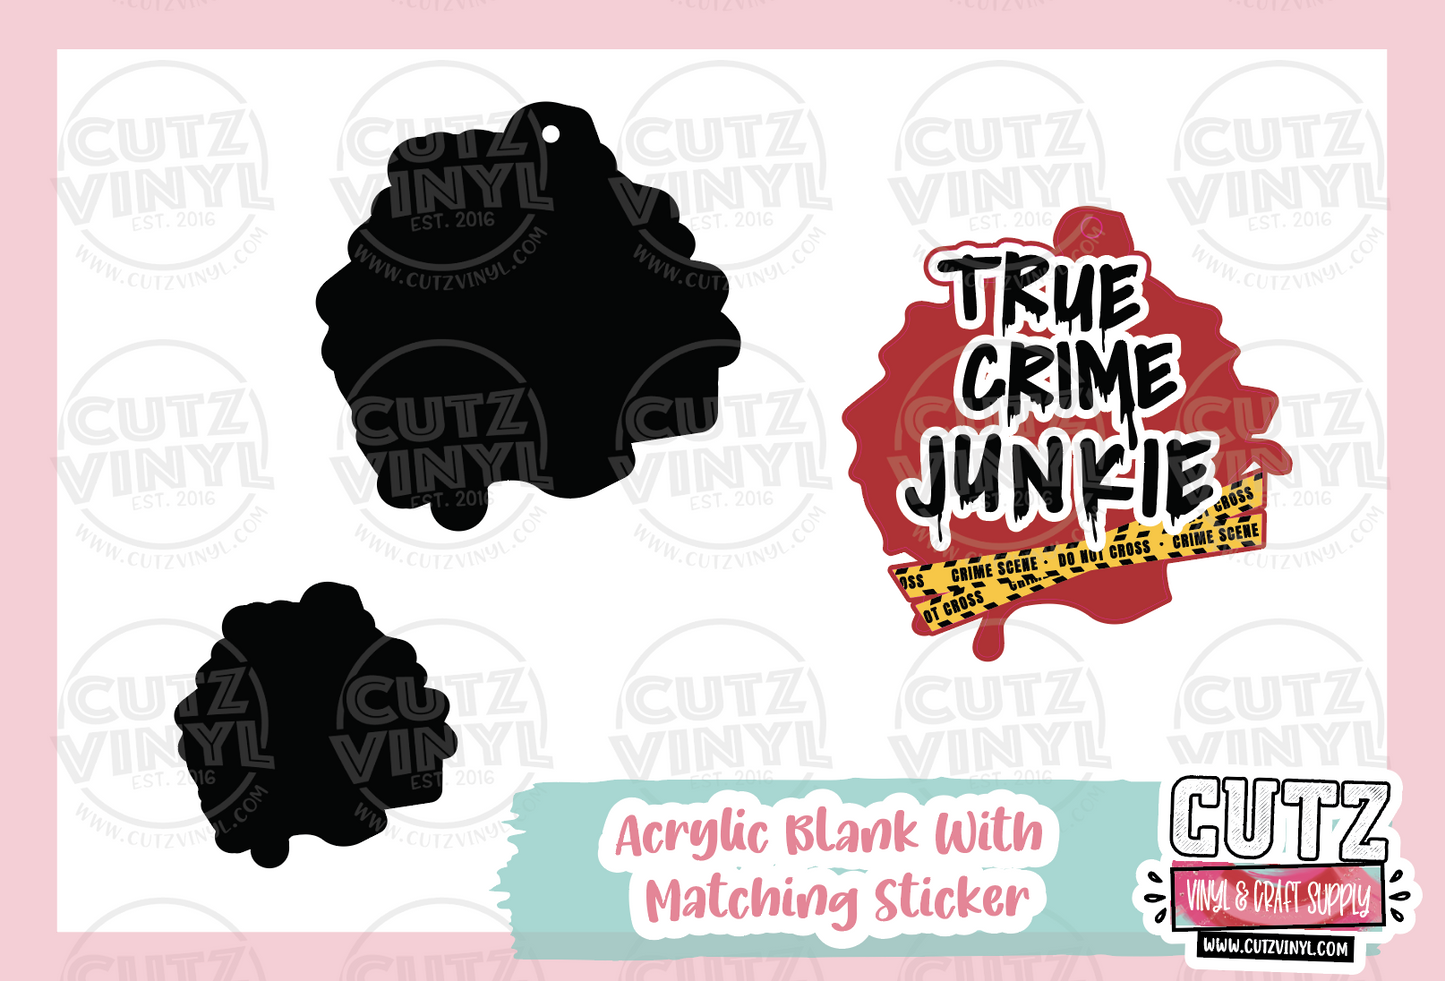 True Crime - Acrylic Badge Reel Blank and Matching Sticker